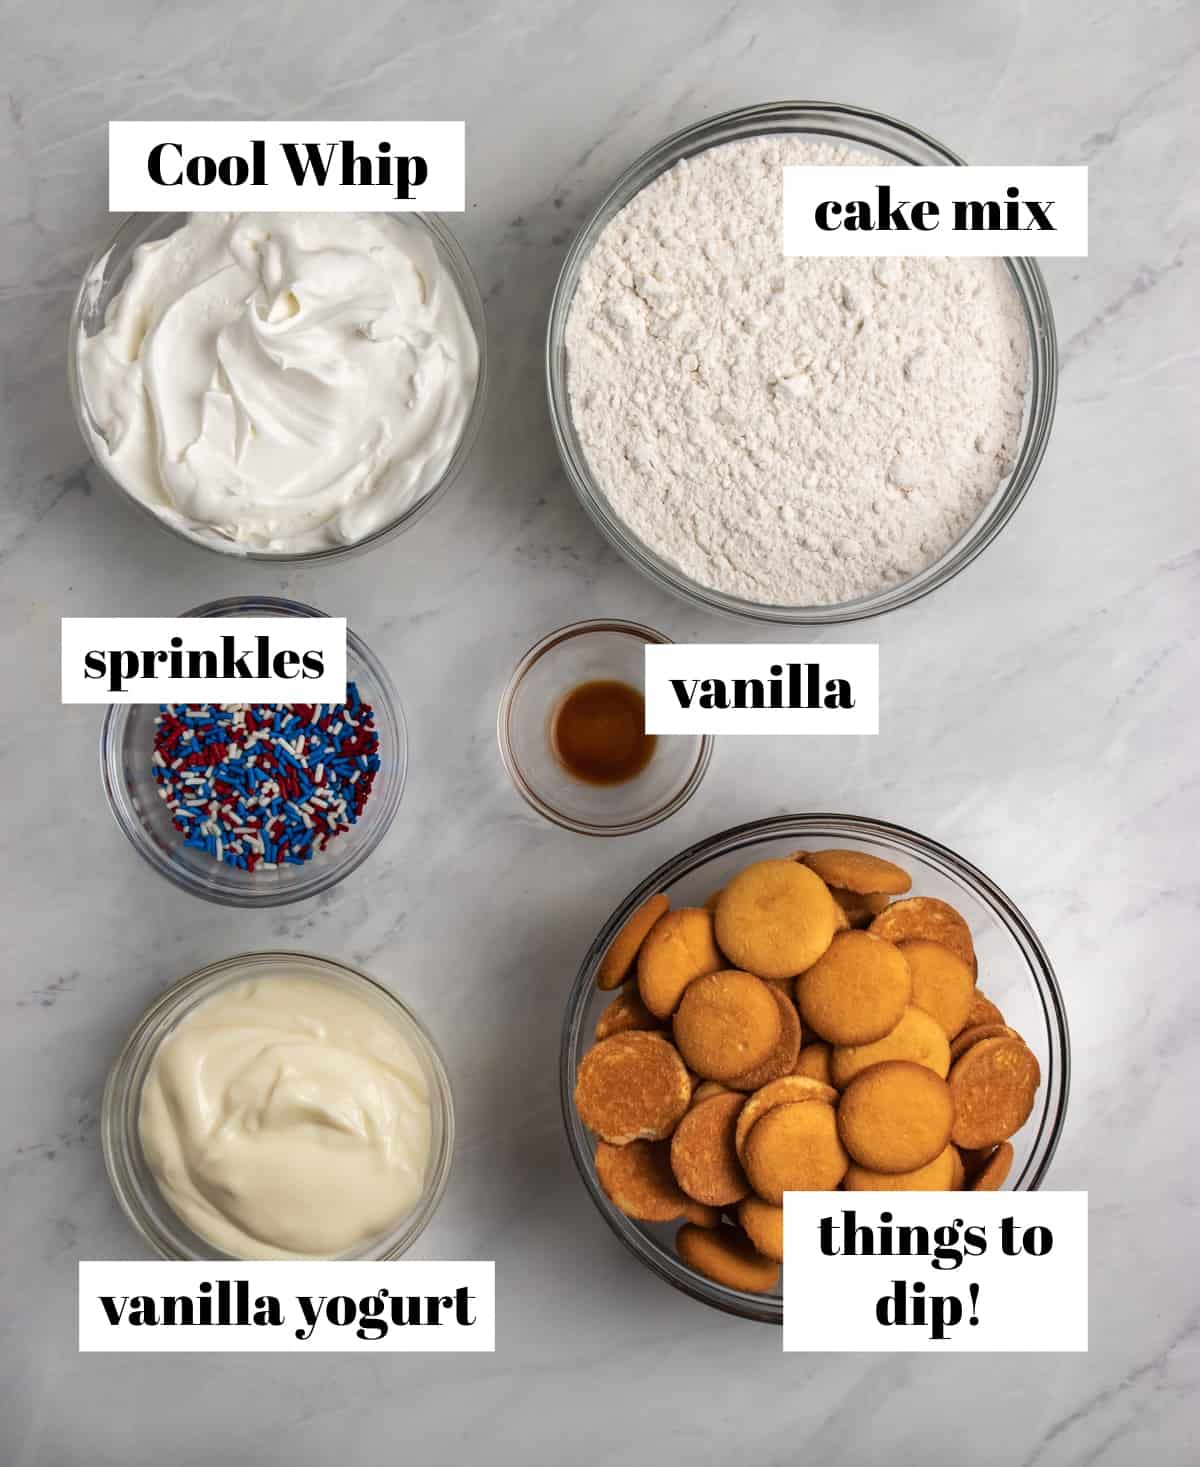 Cool whip, sprinkles, vanilla and cake mix labeled on counter.